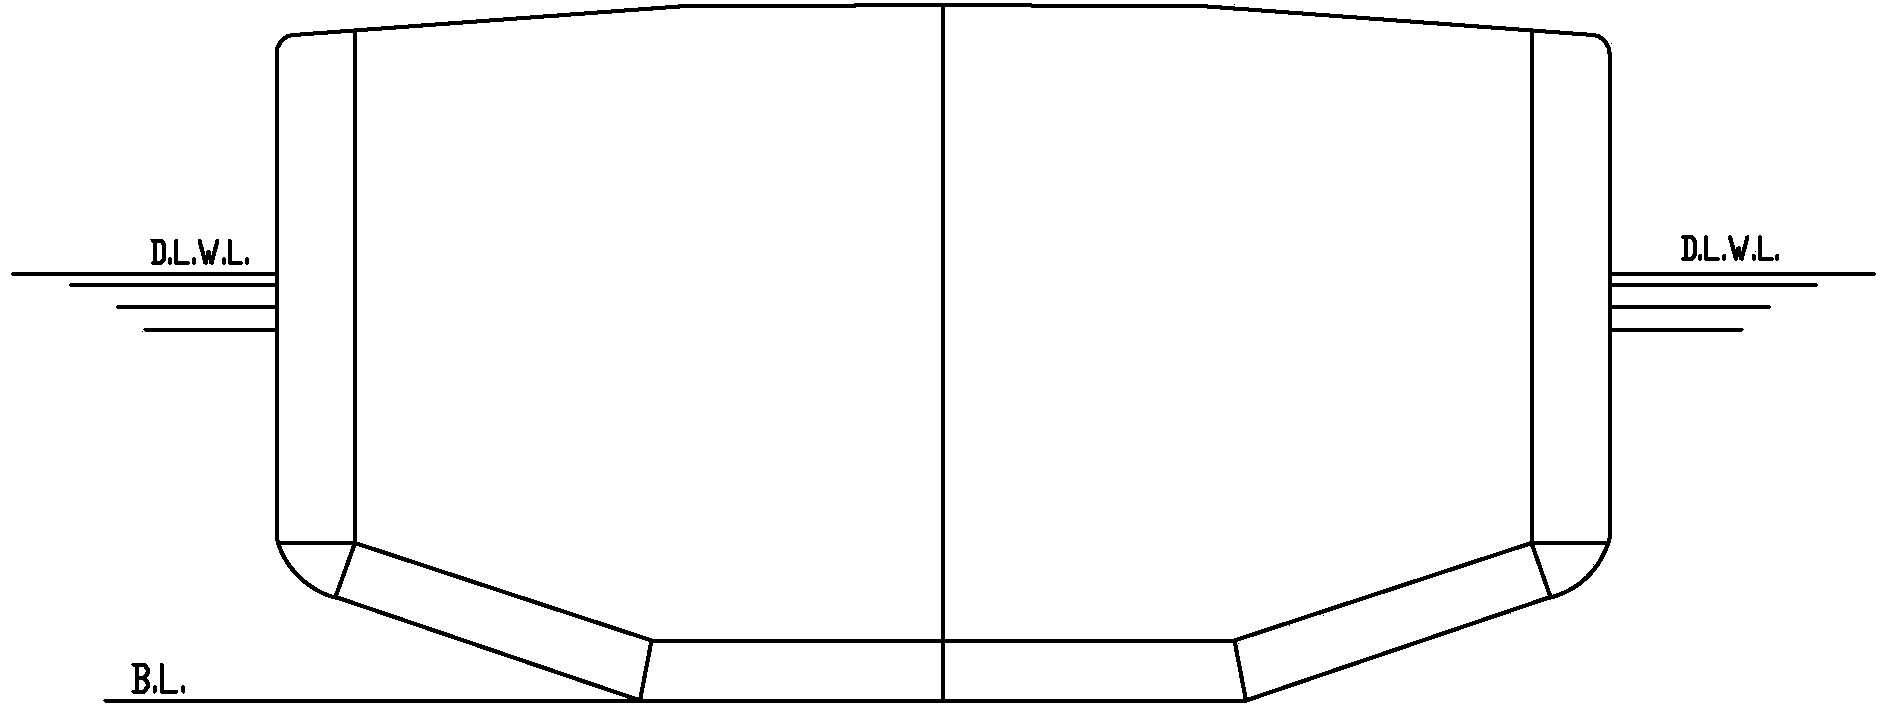 Slanted double-bottom and arc-bilge ship with inner bottoms aligned directly